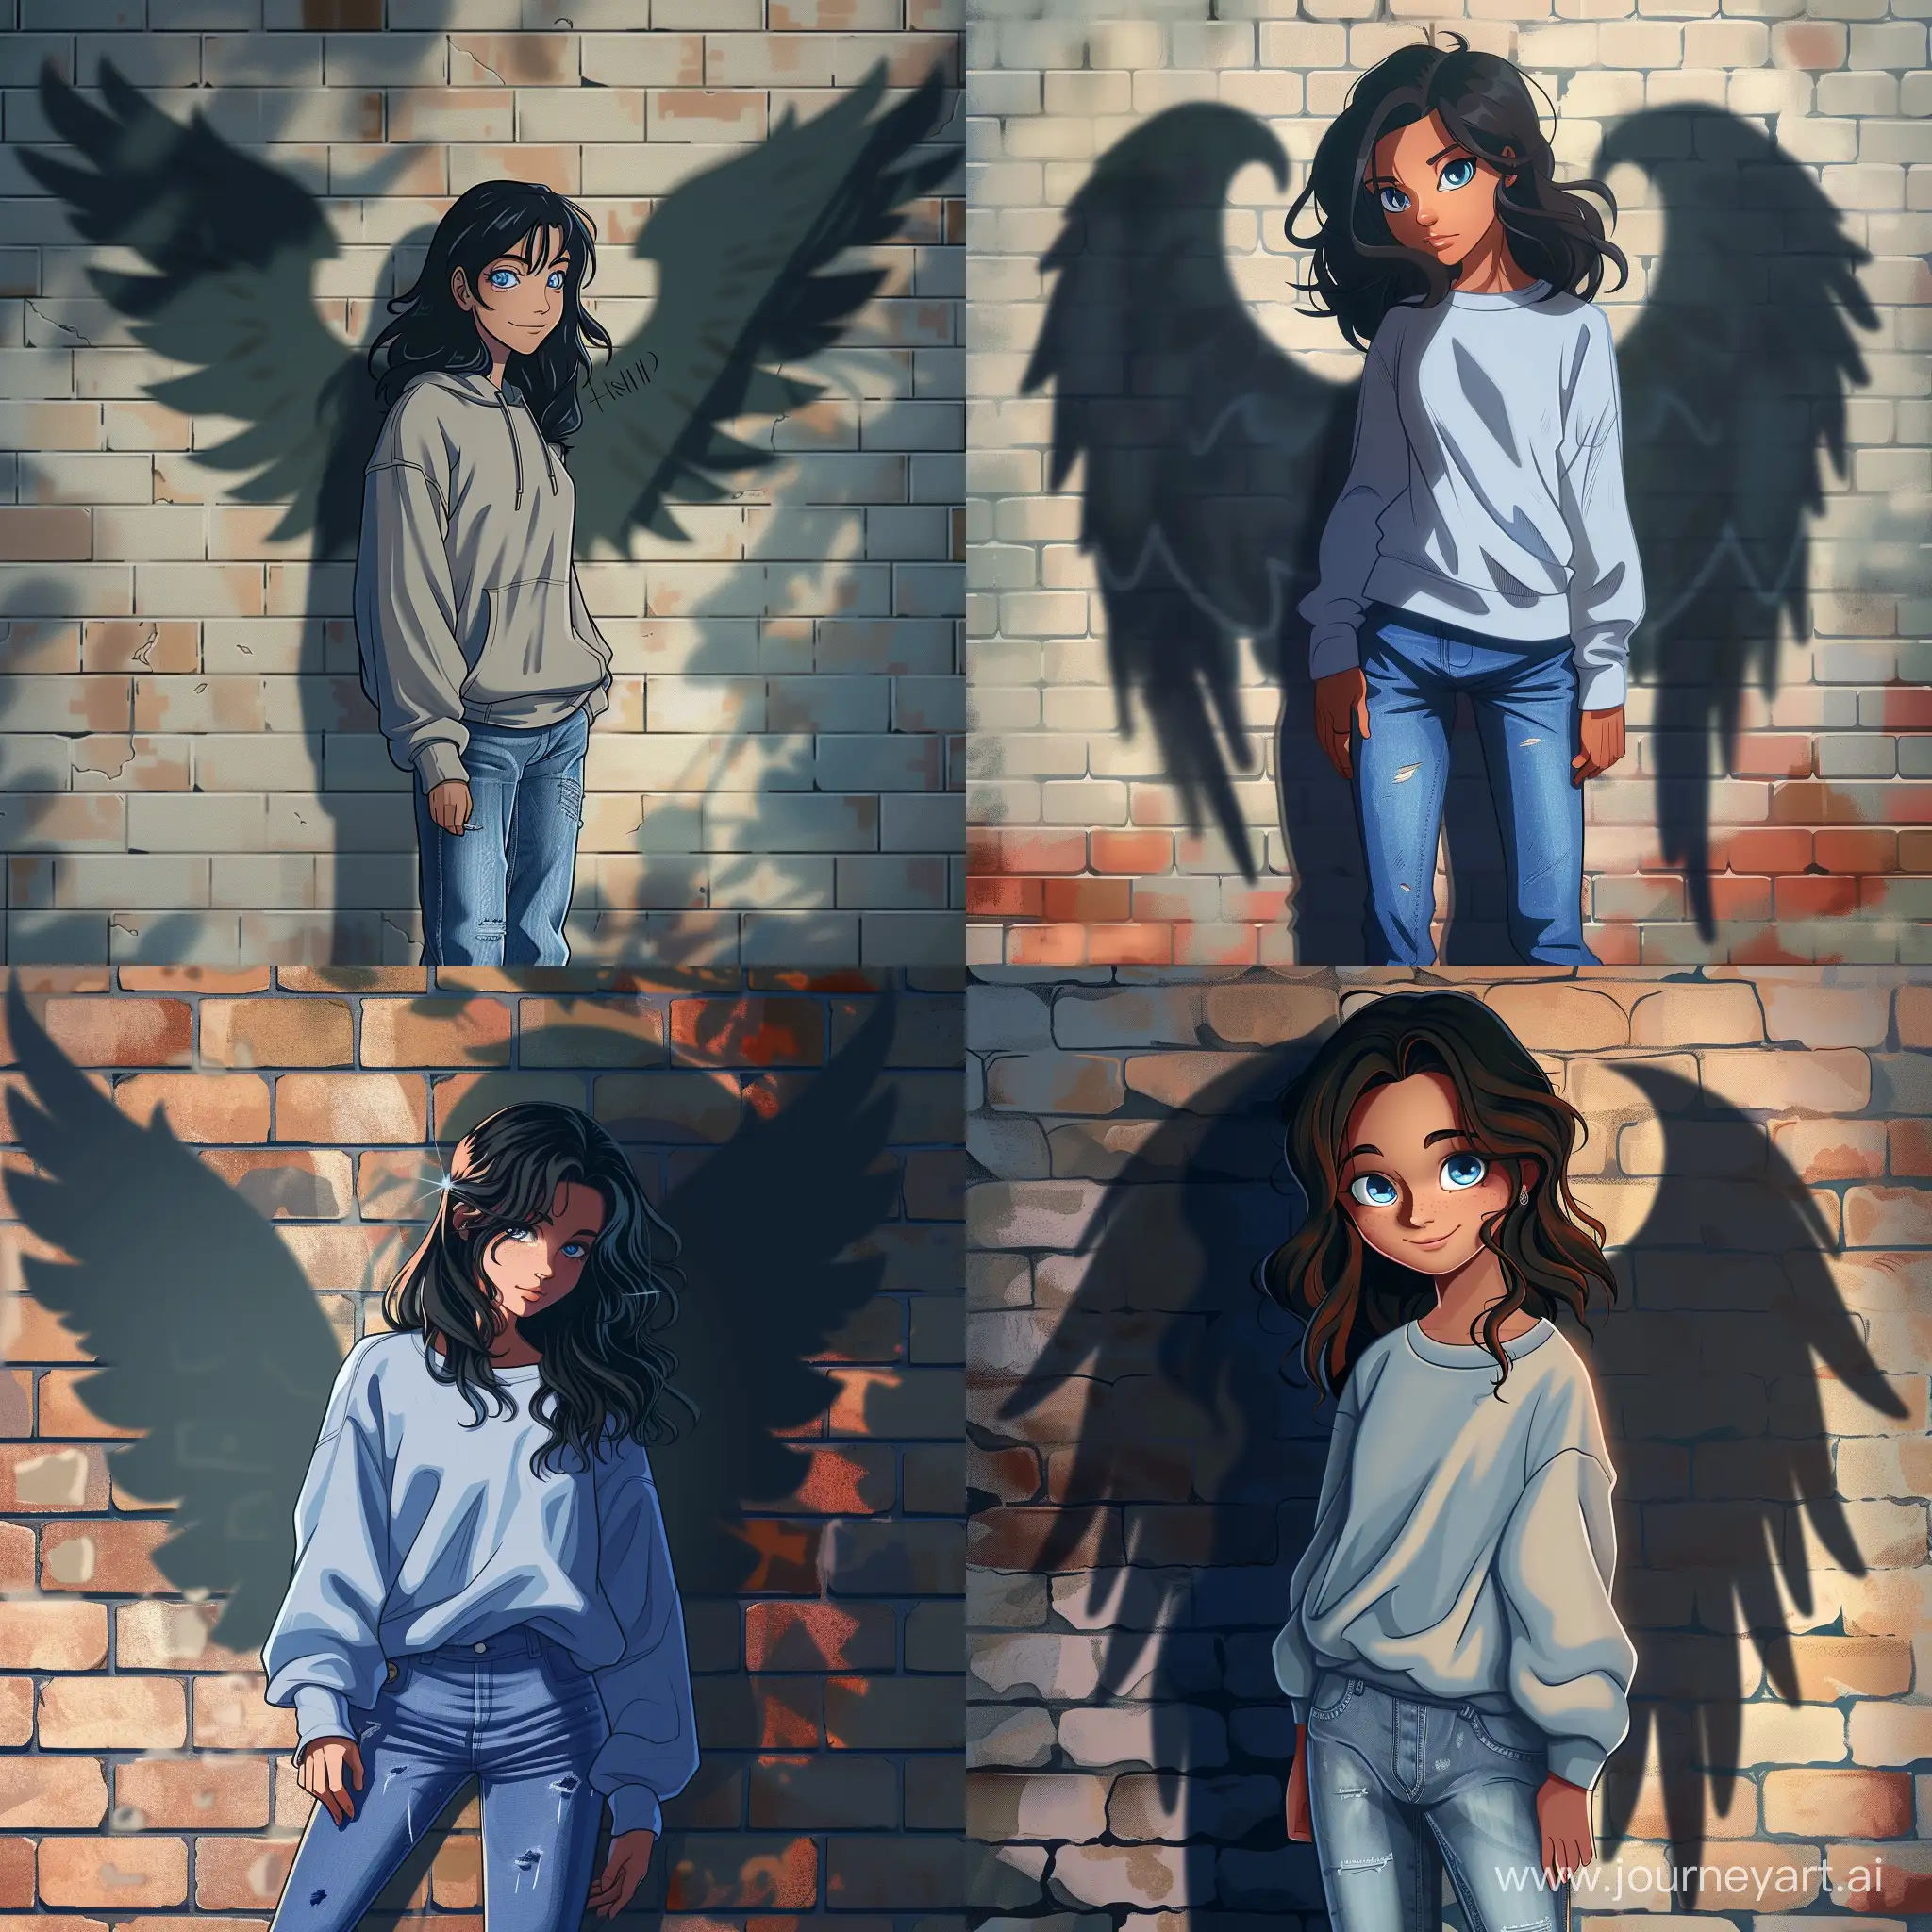 Teenage-Angel-DarkHaired-Girl-with-Blue-Eyes-and-Halo-on-Brick-Wall-Background